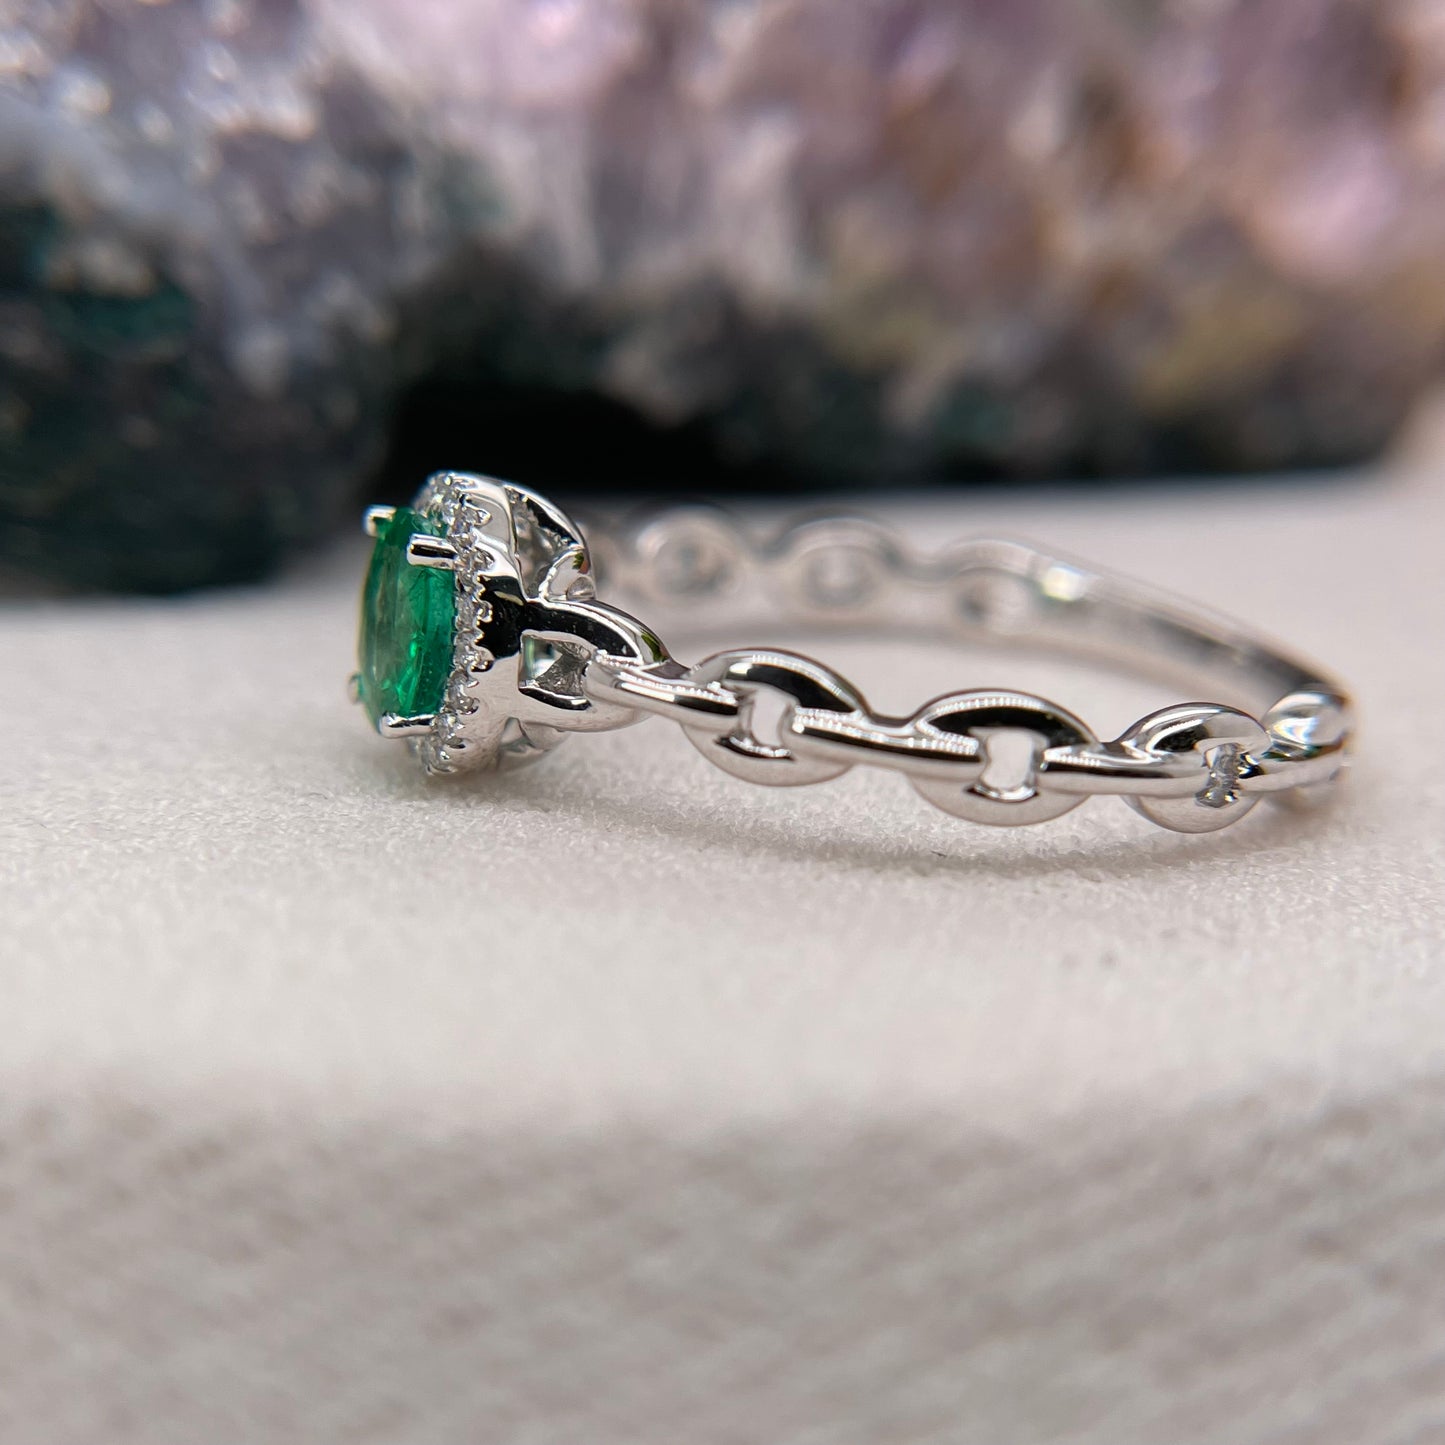 14K White Gold Emerald Ring with Diamond